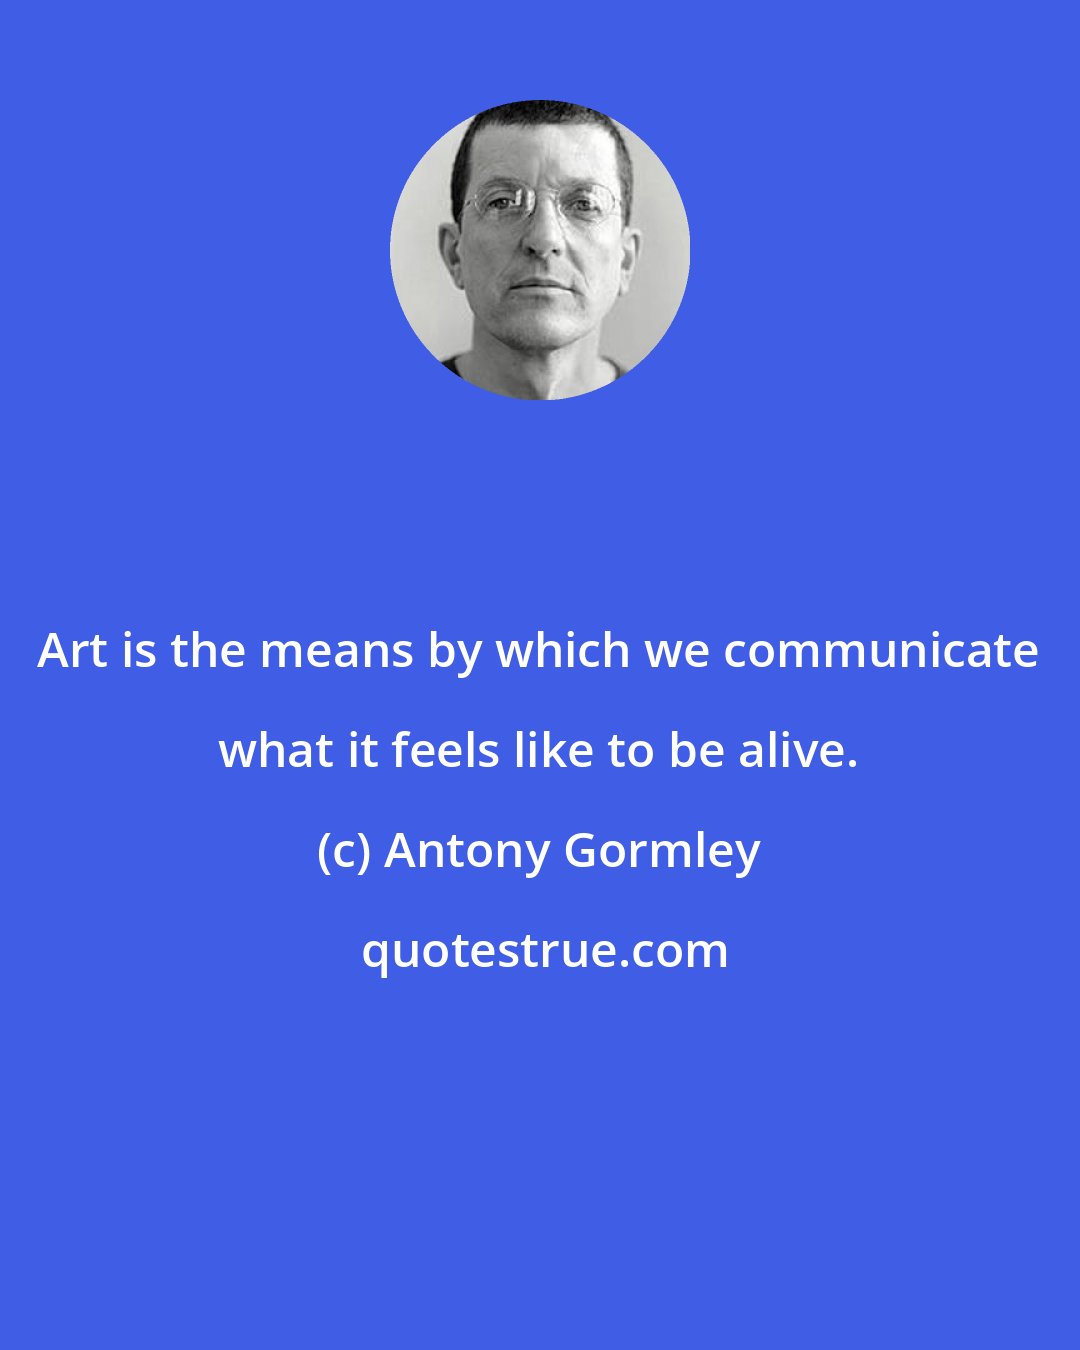 Antony Gormley: Art is the means by which we communicate what it feels like to be alive.